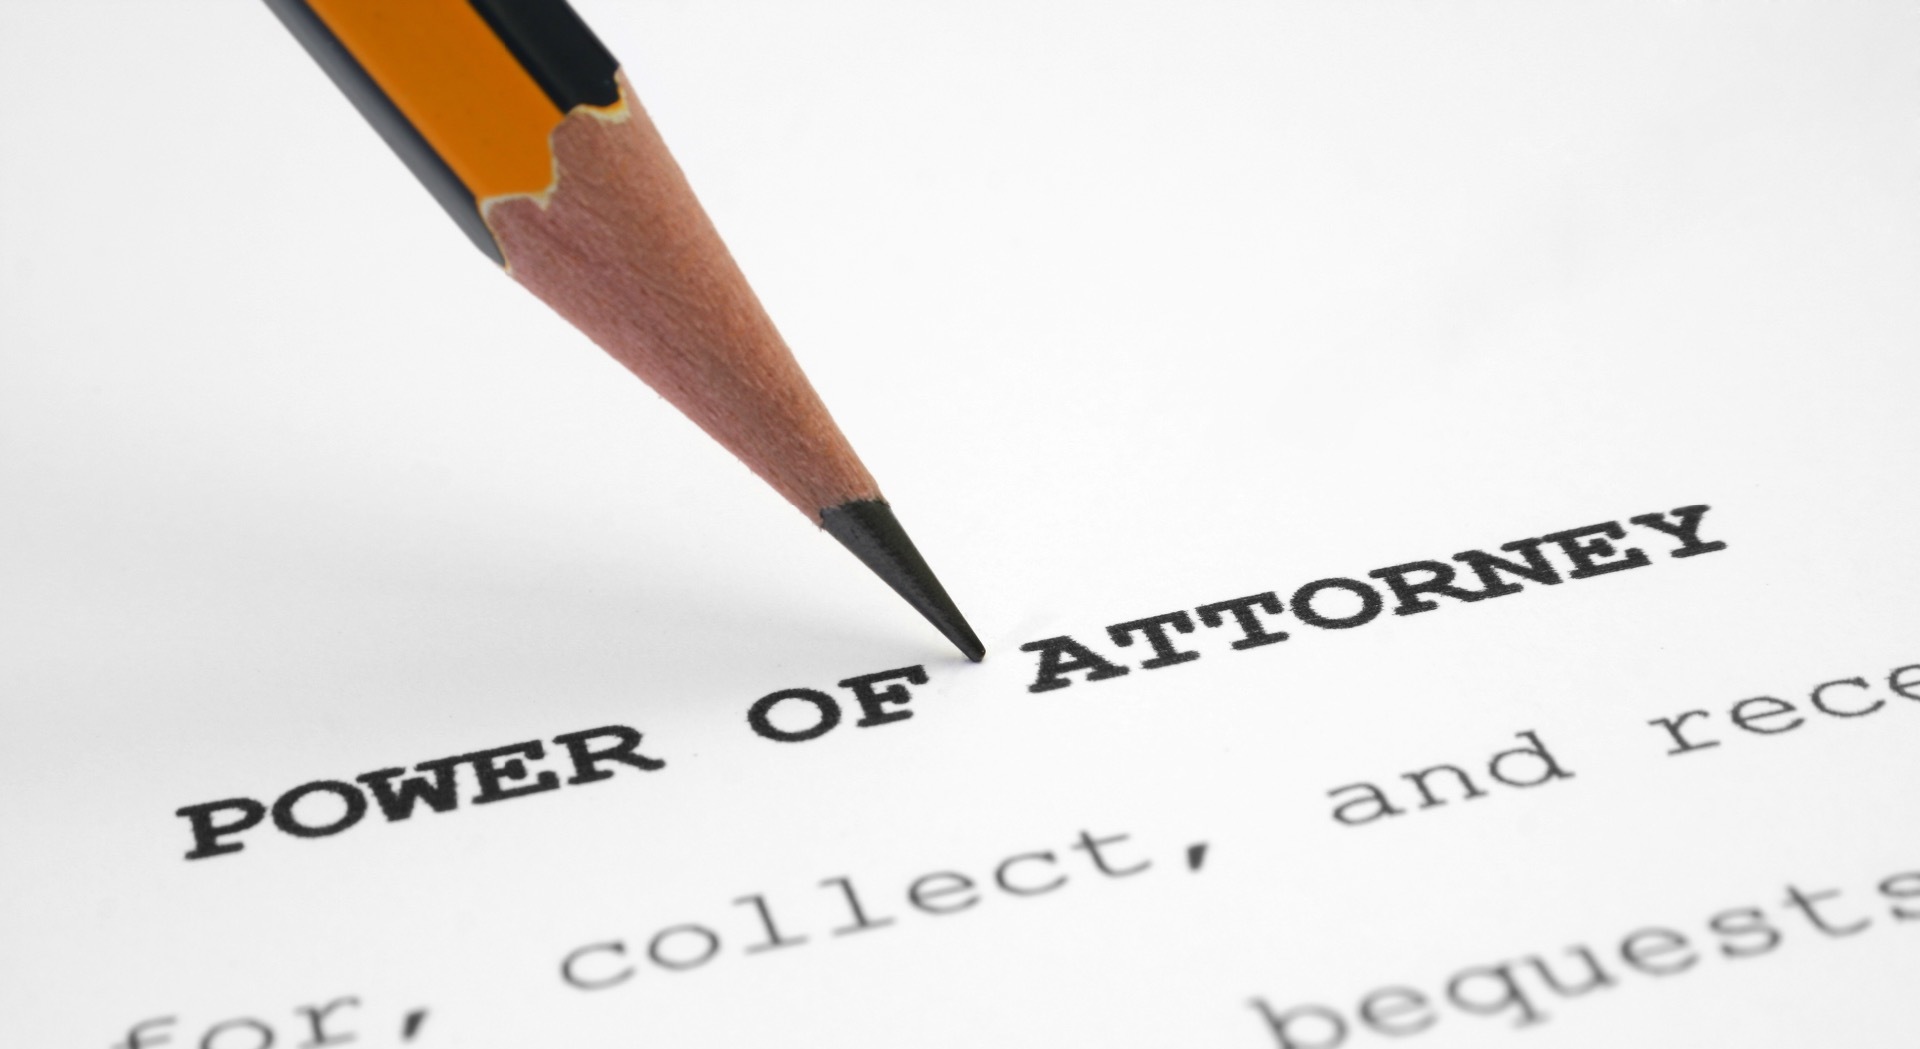 Lasting Power of Attorney from £300 plus VAT